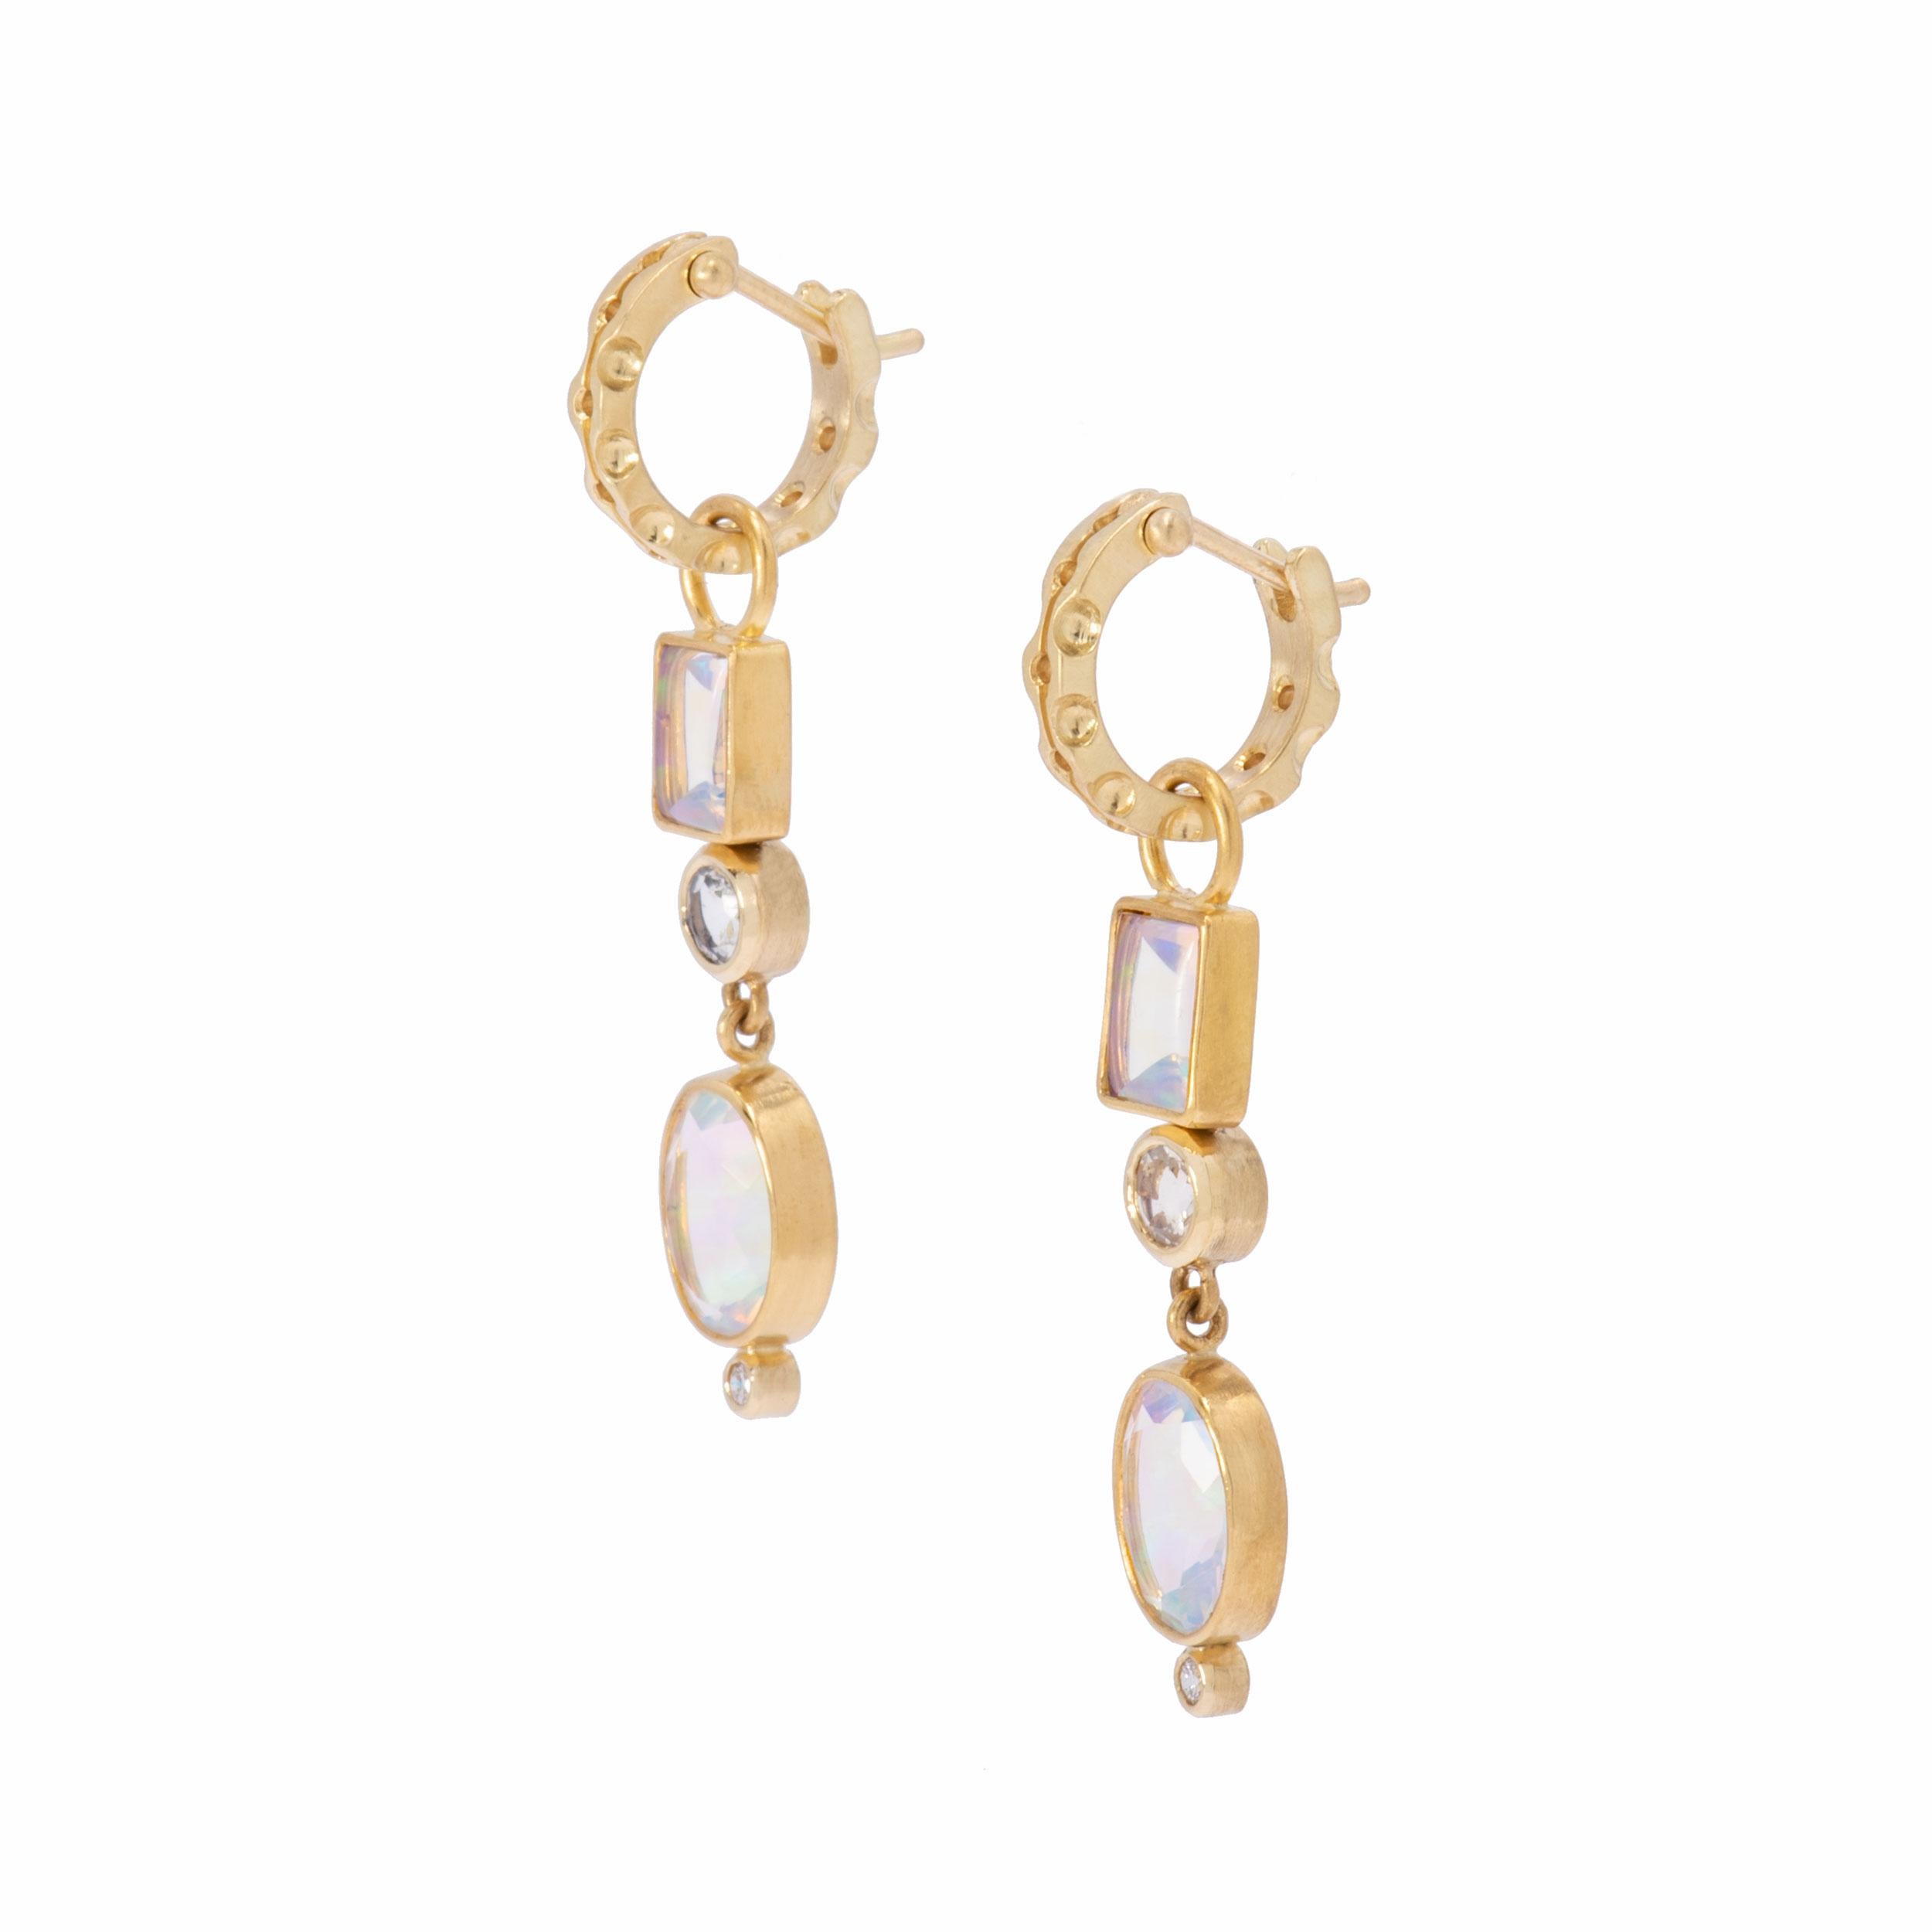 Diaphanous Brazilian Opals 5.05 tcw. deliver volumes of flash in Victorian Keyhole Drop Earrings set in 22k and 18k gold. Faceted ovals and faceted cushiony, emerald cut Brazilian opals top and bottom are punctuated with milky moonstones .67tcw. and